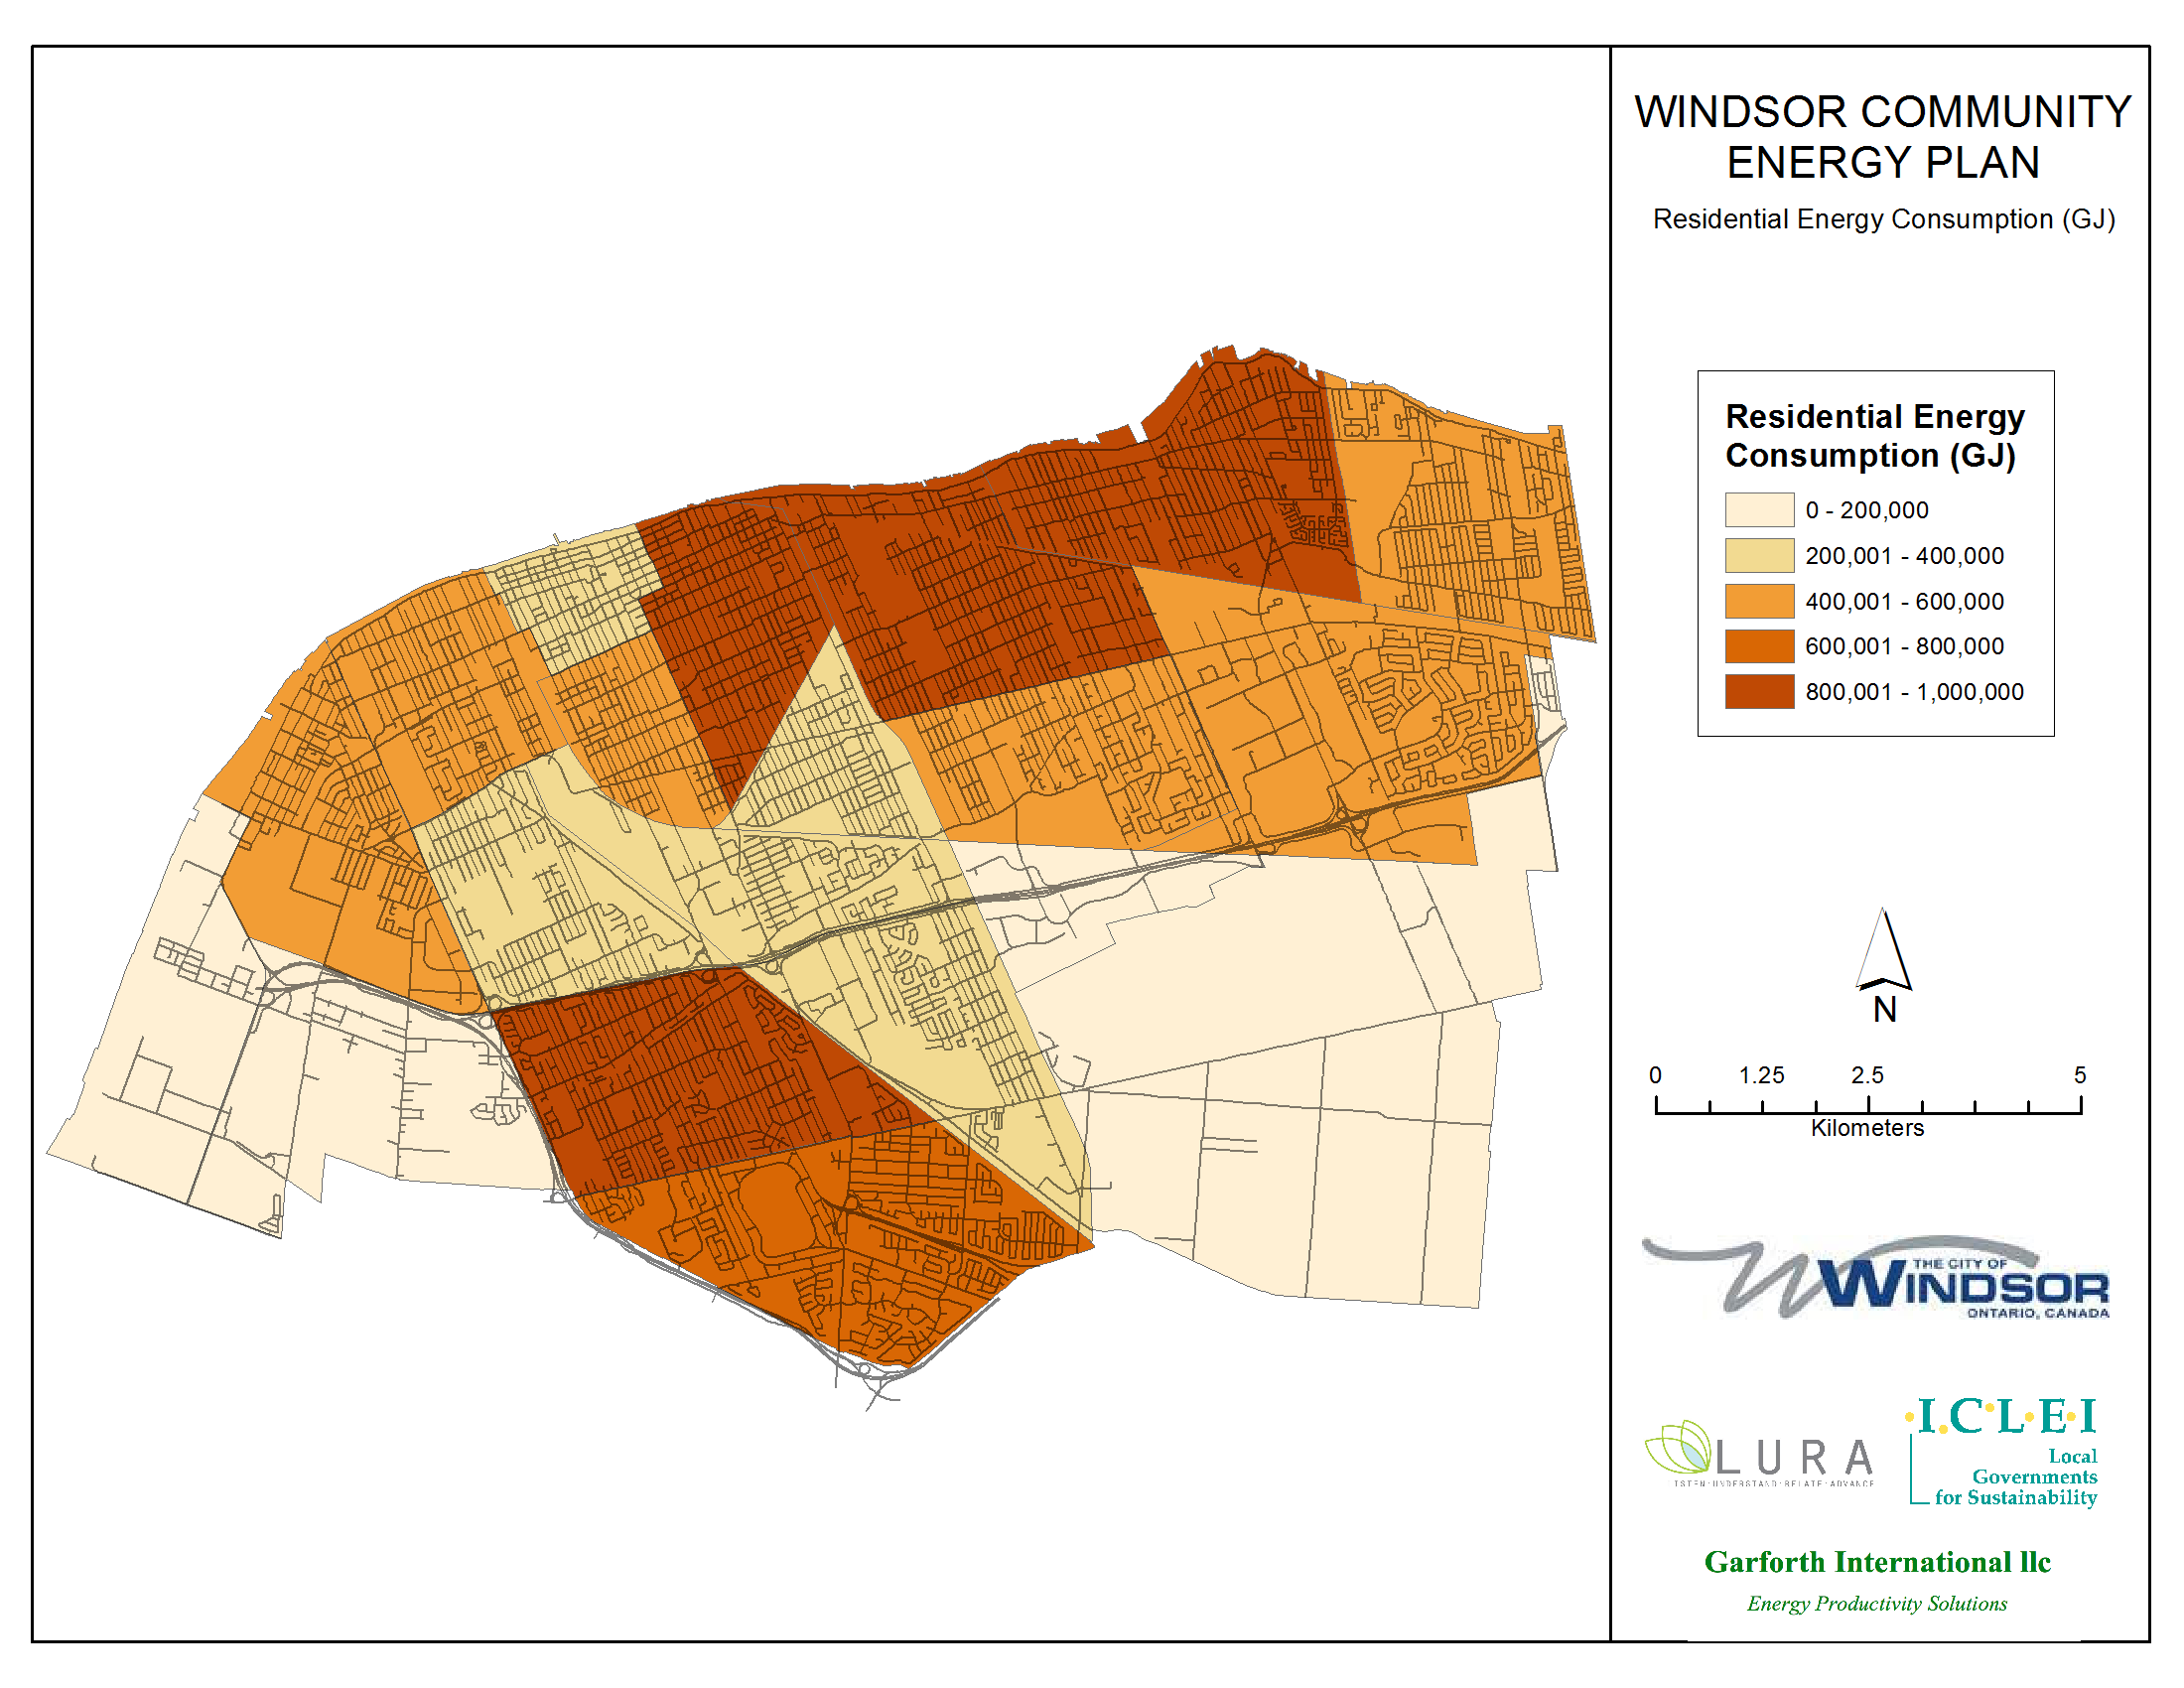 Thumbnail map of residential energy consumption within the City of Windsor